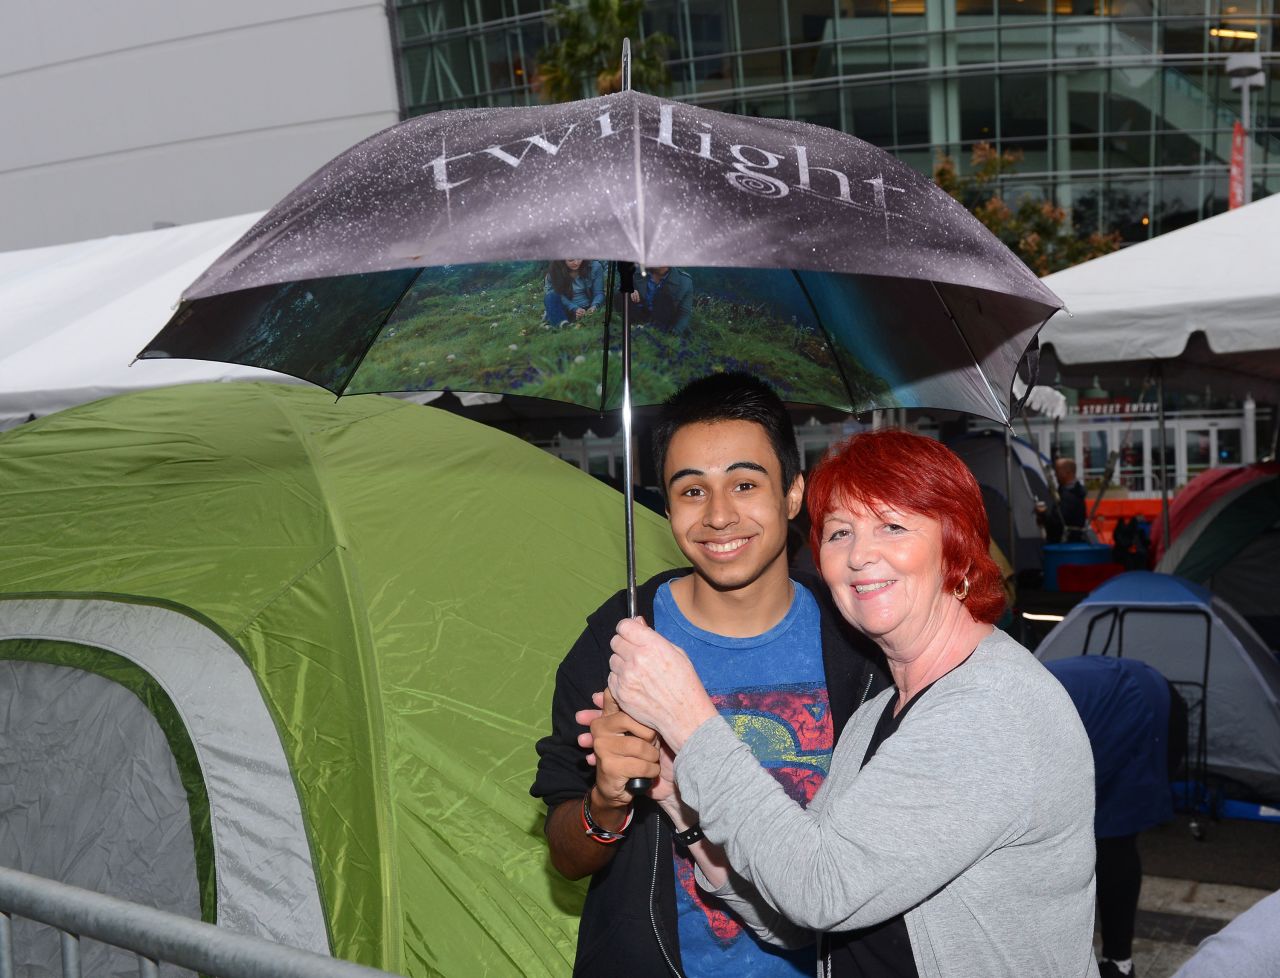 Two fans brave the rain with a "Twilight" umbrella at tent city.